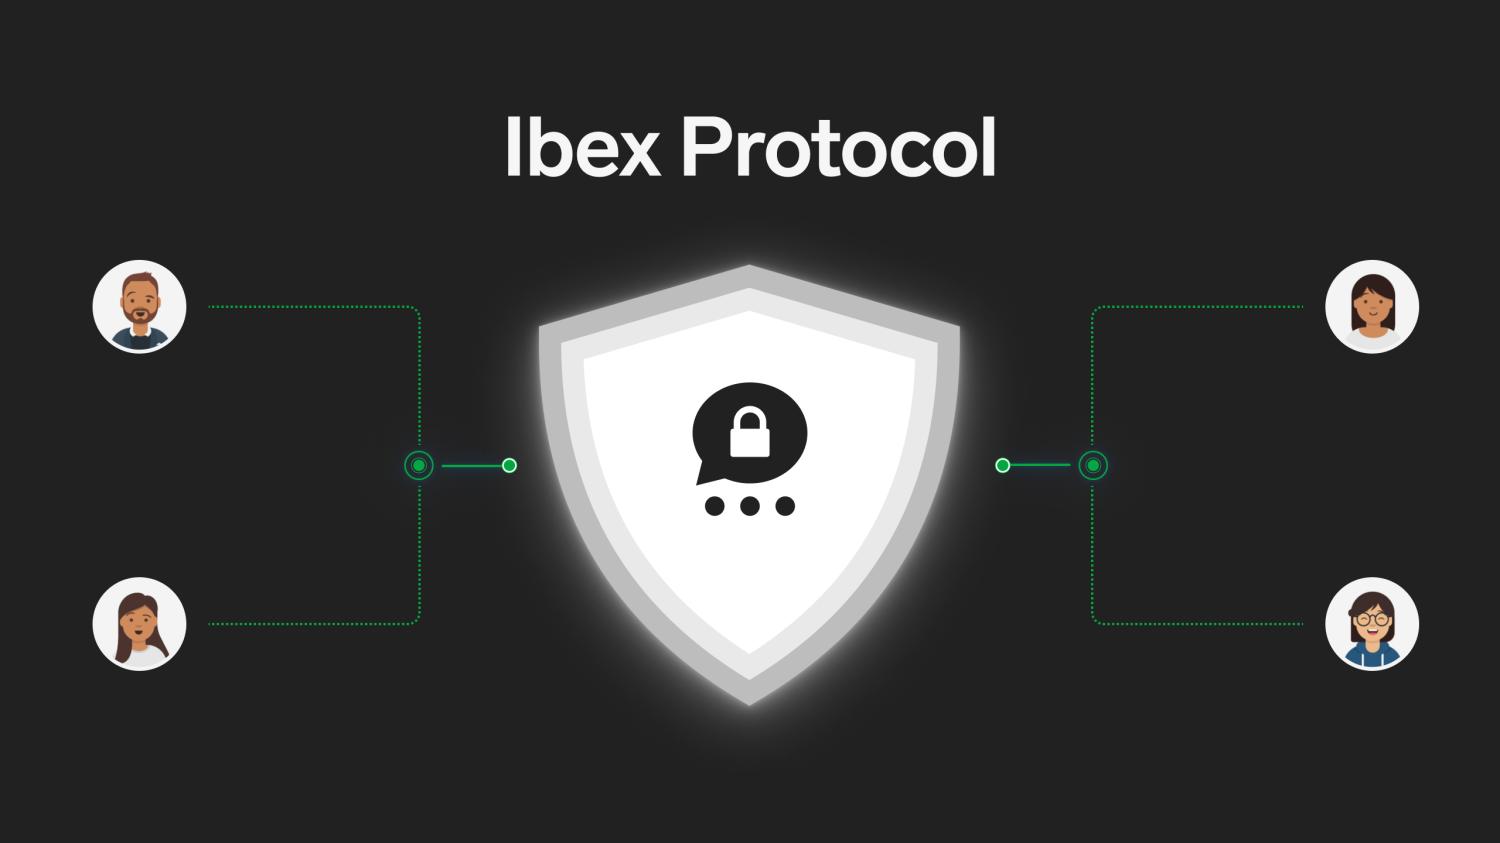 New Communication Protocol “Ibex” and Extended Protocol Suite